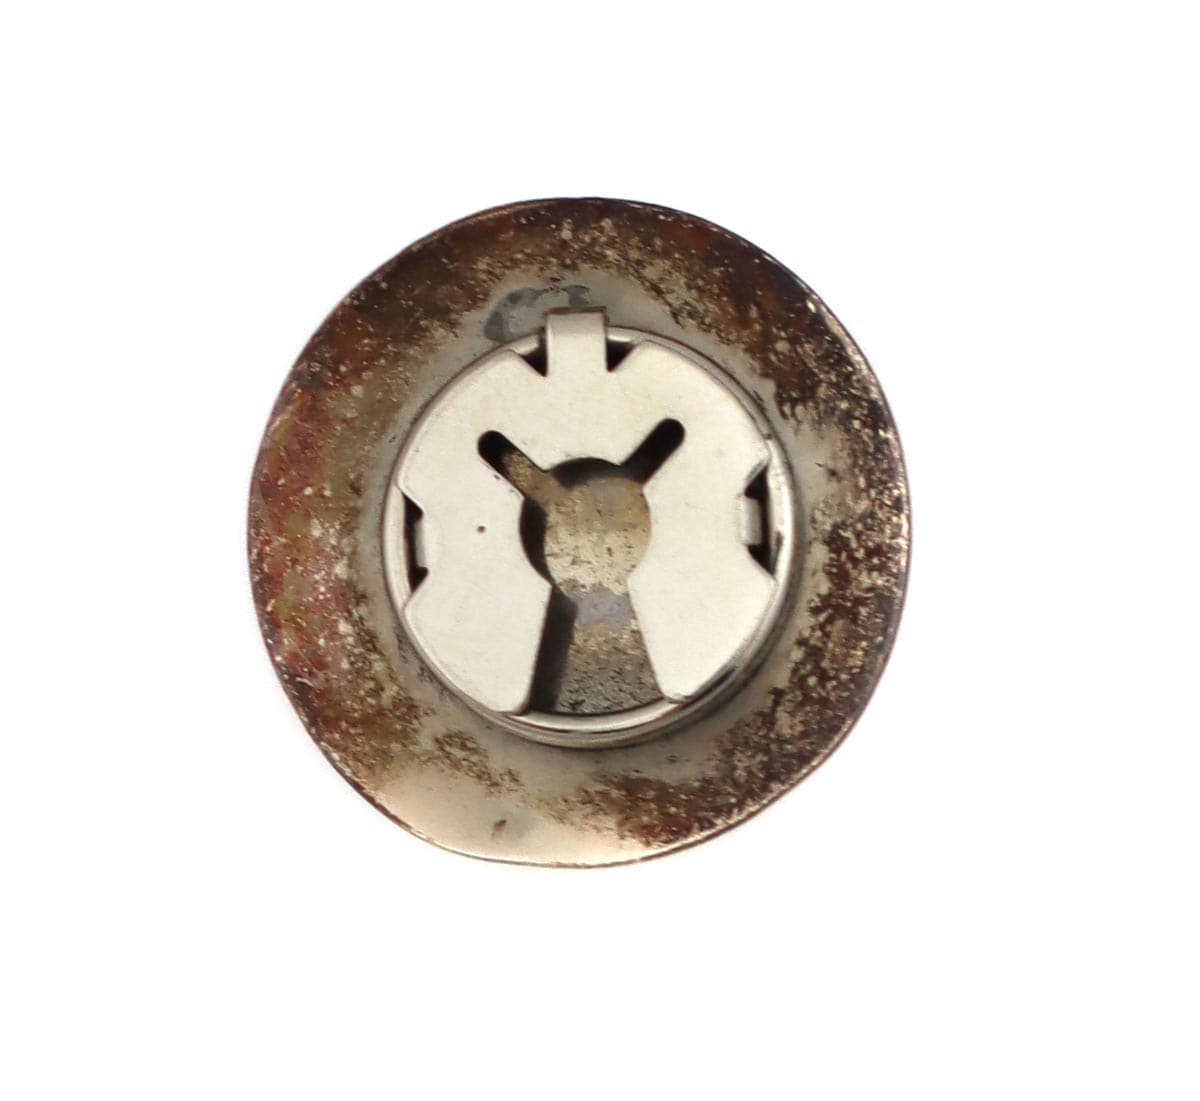 Hopi Silver Button Cover with Stamped Design c. 1940-50s, 1.125" diameter (J14165-06)